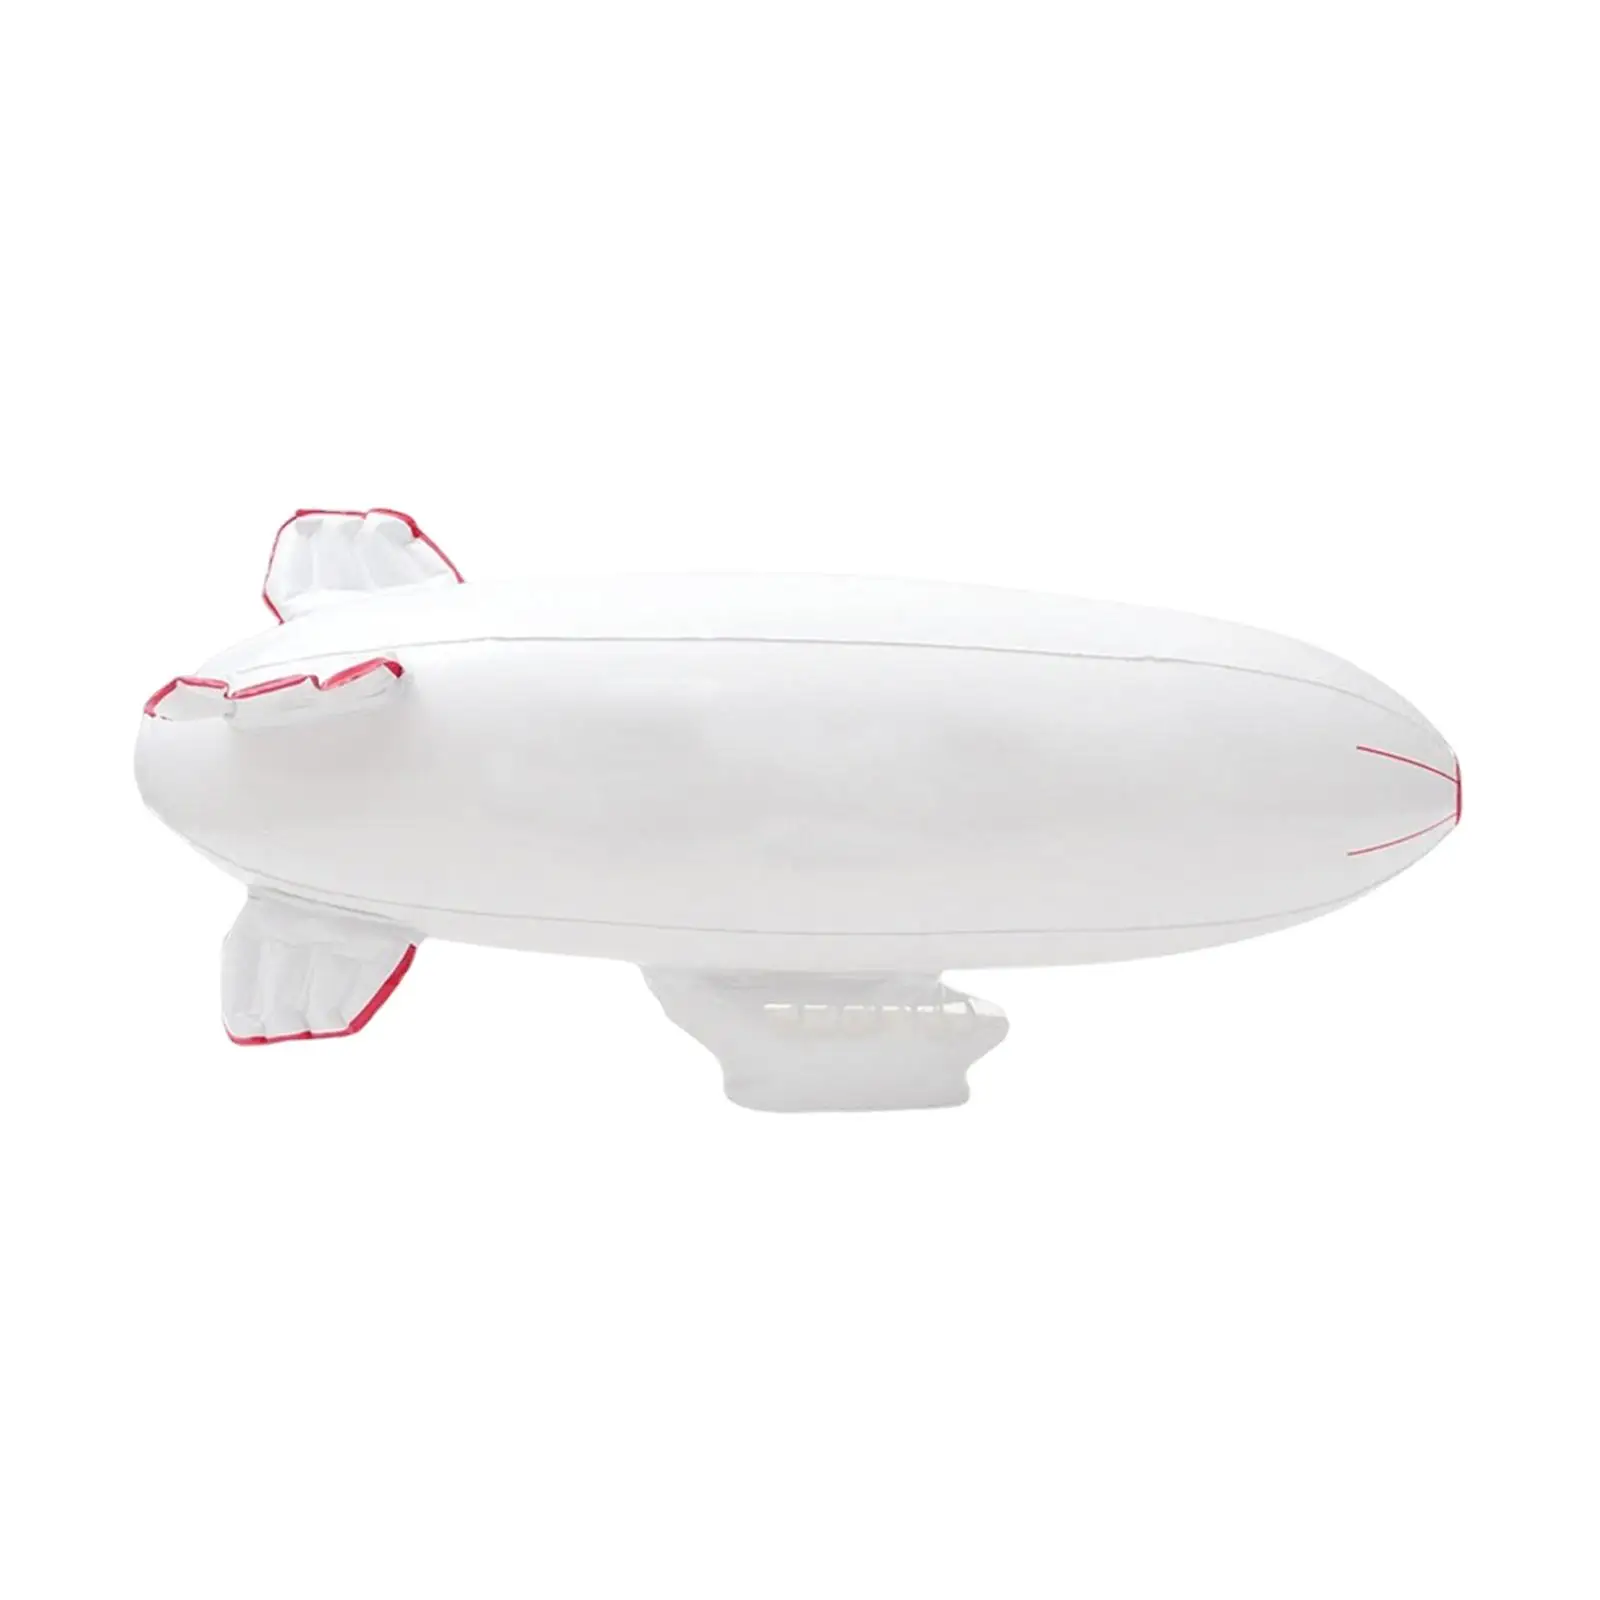 Nflatable Toy Reusable Tenacity unique Smooth Surface PVC Spaceship Model for Birthday Party Wedding Celebration Decoration